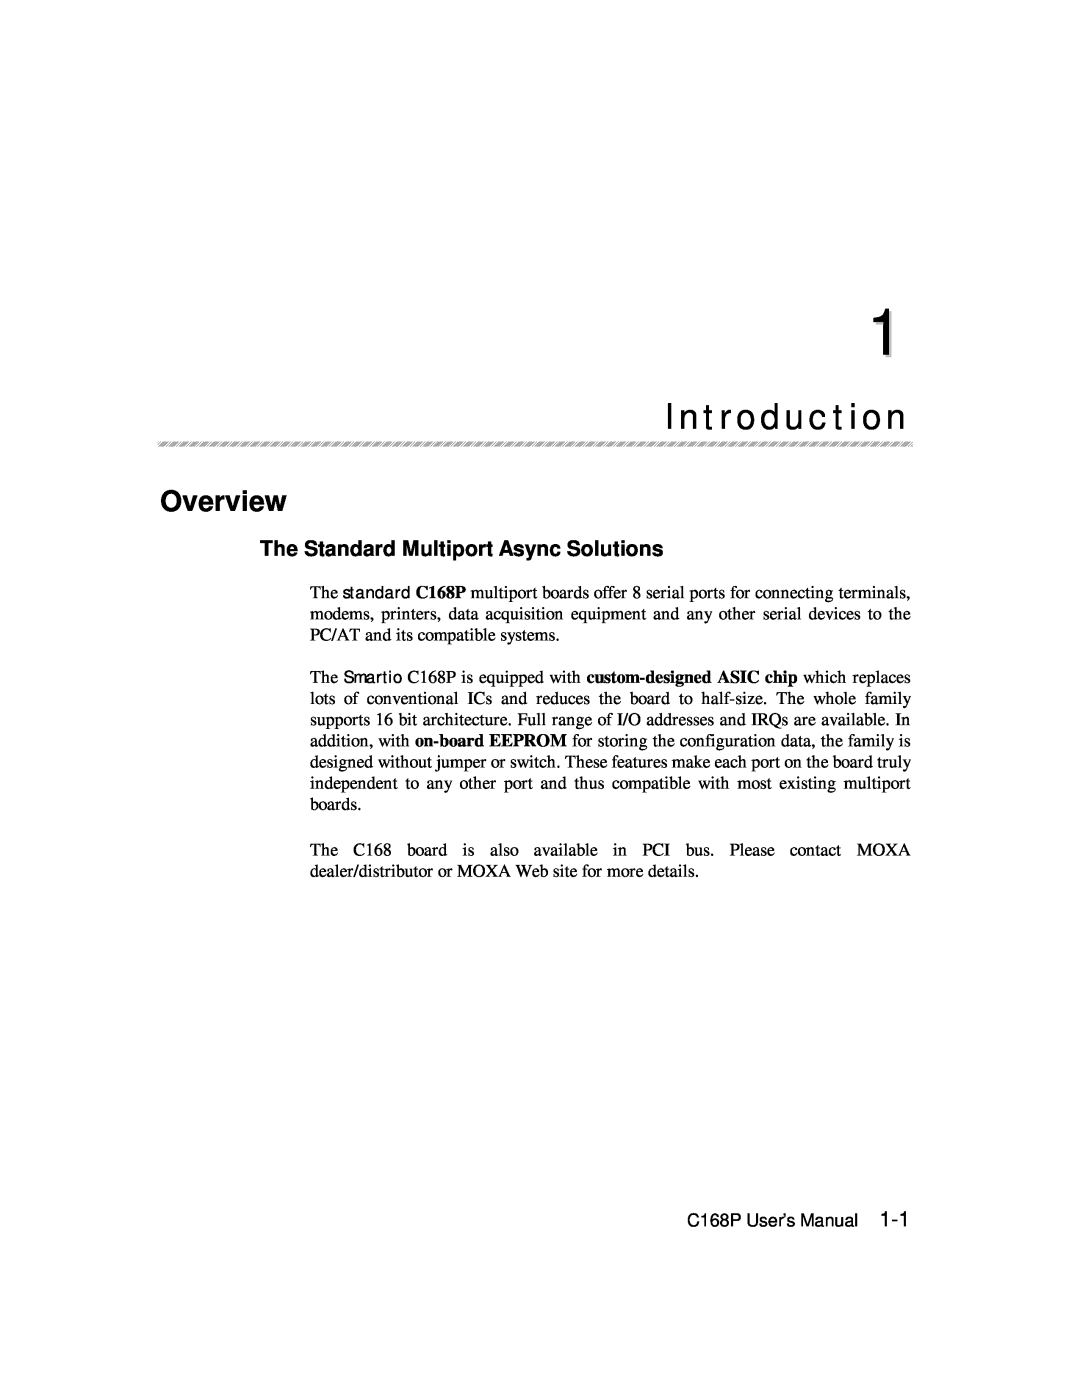 Moxa Technologies C168P user manual Introduction, Overview, The Standard Multiport Async Solutions 